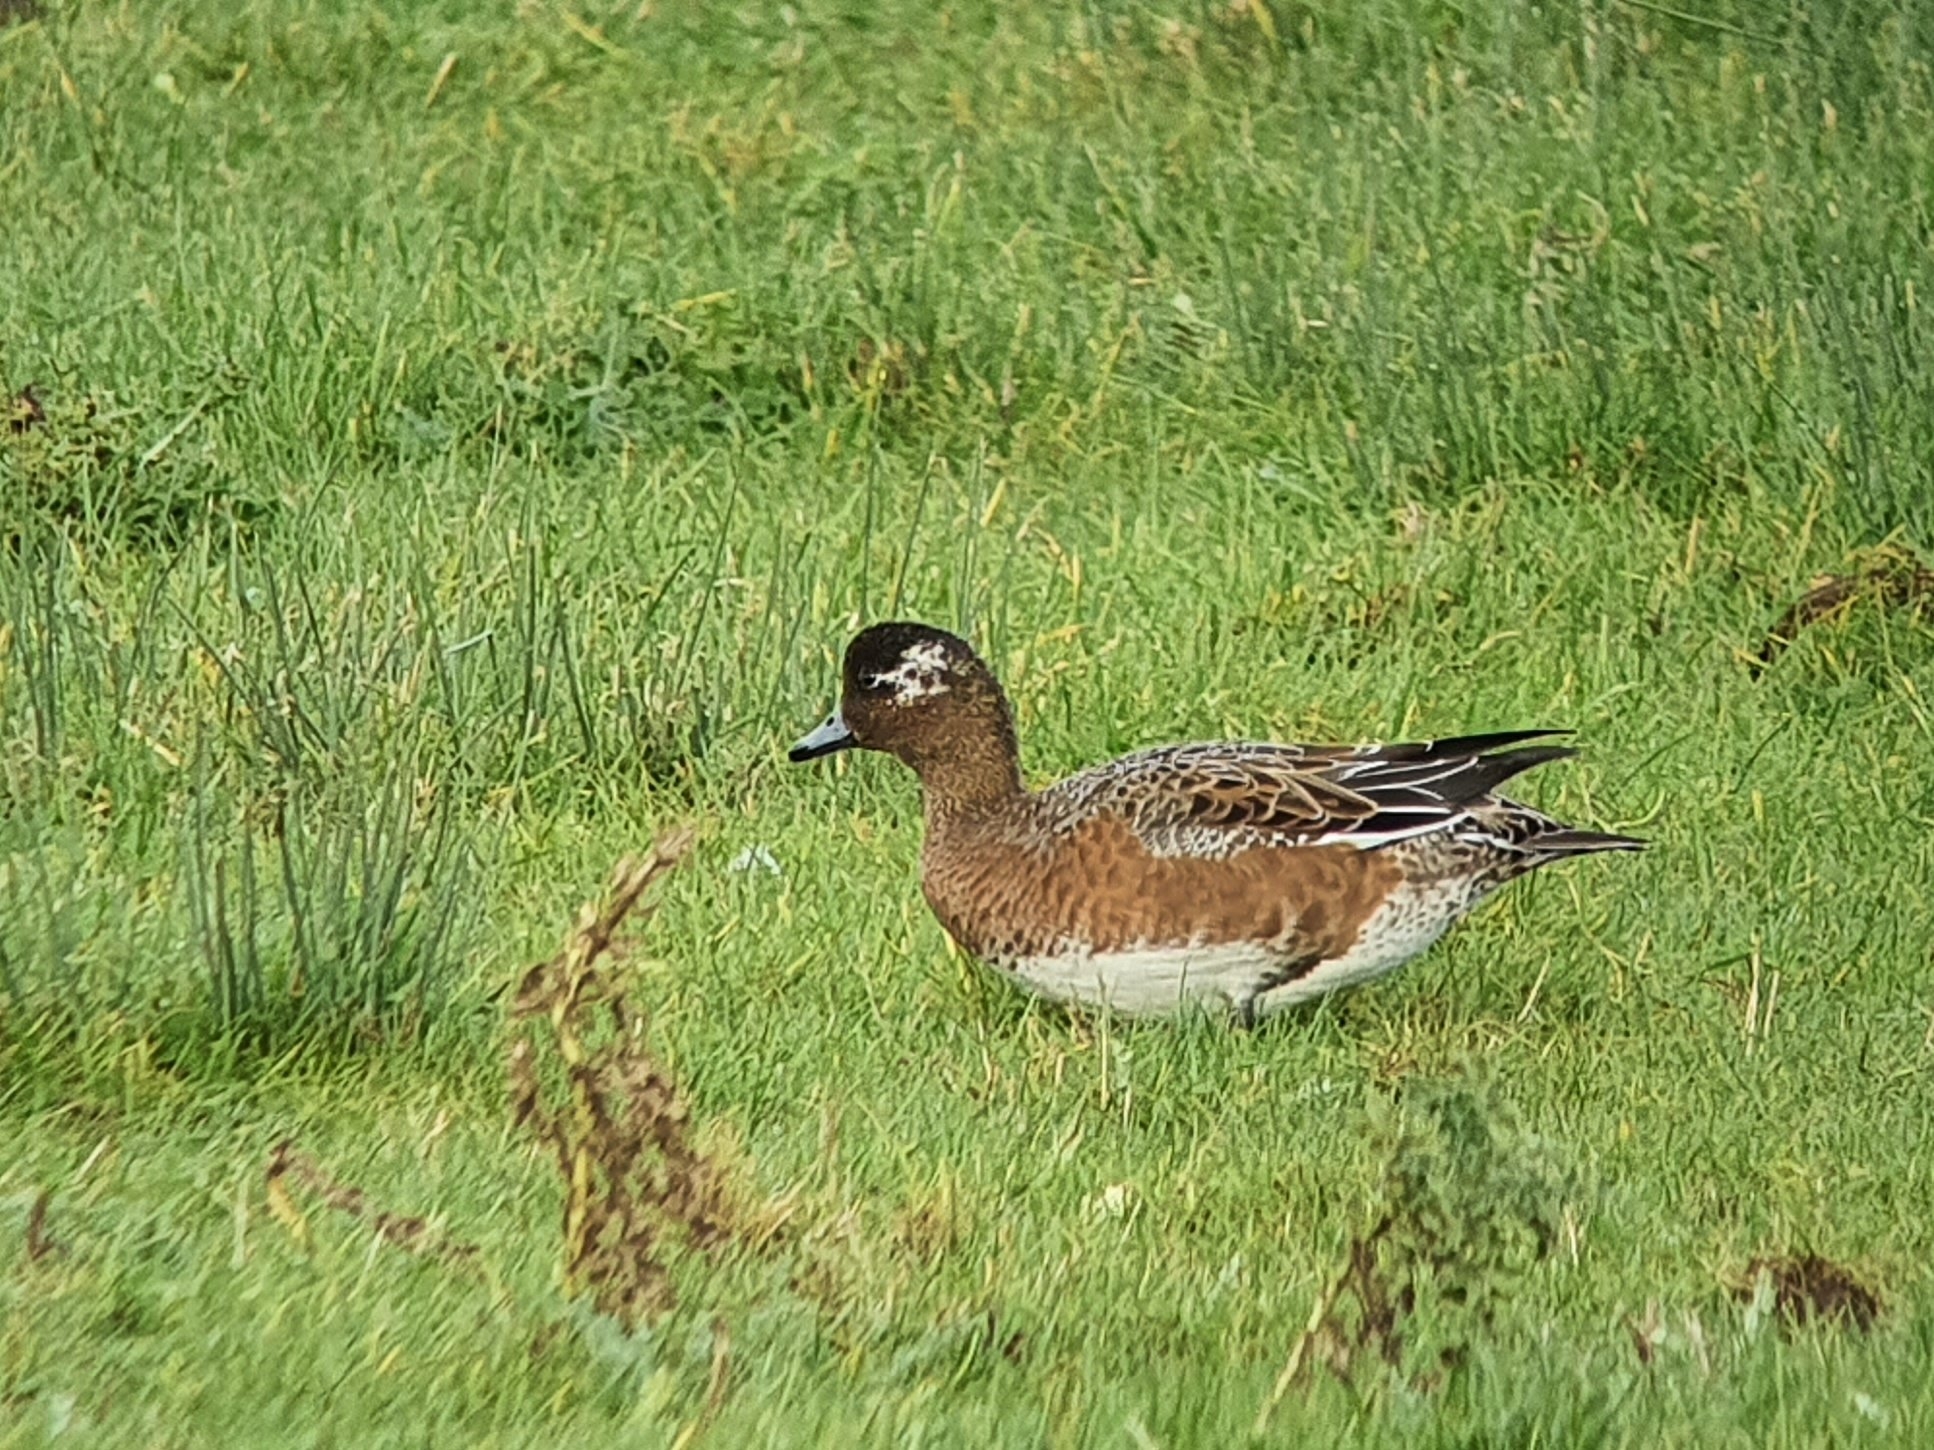 Wigeon on the move